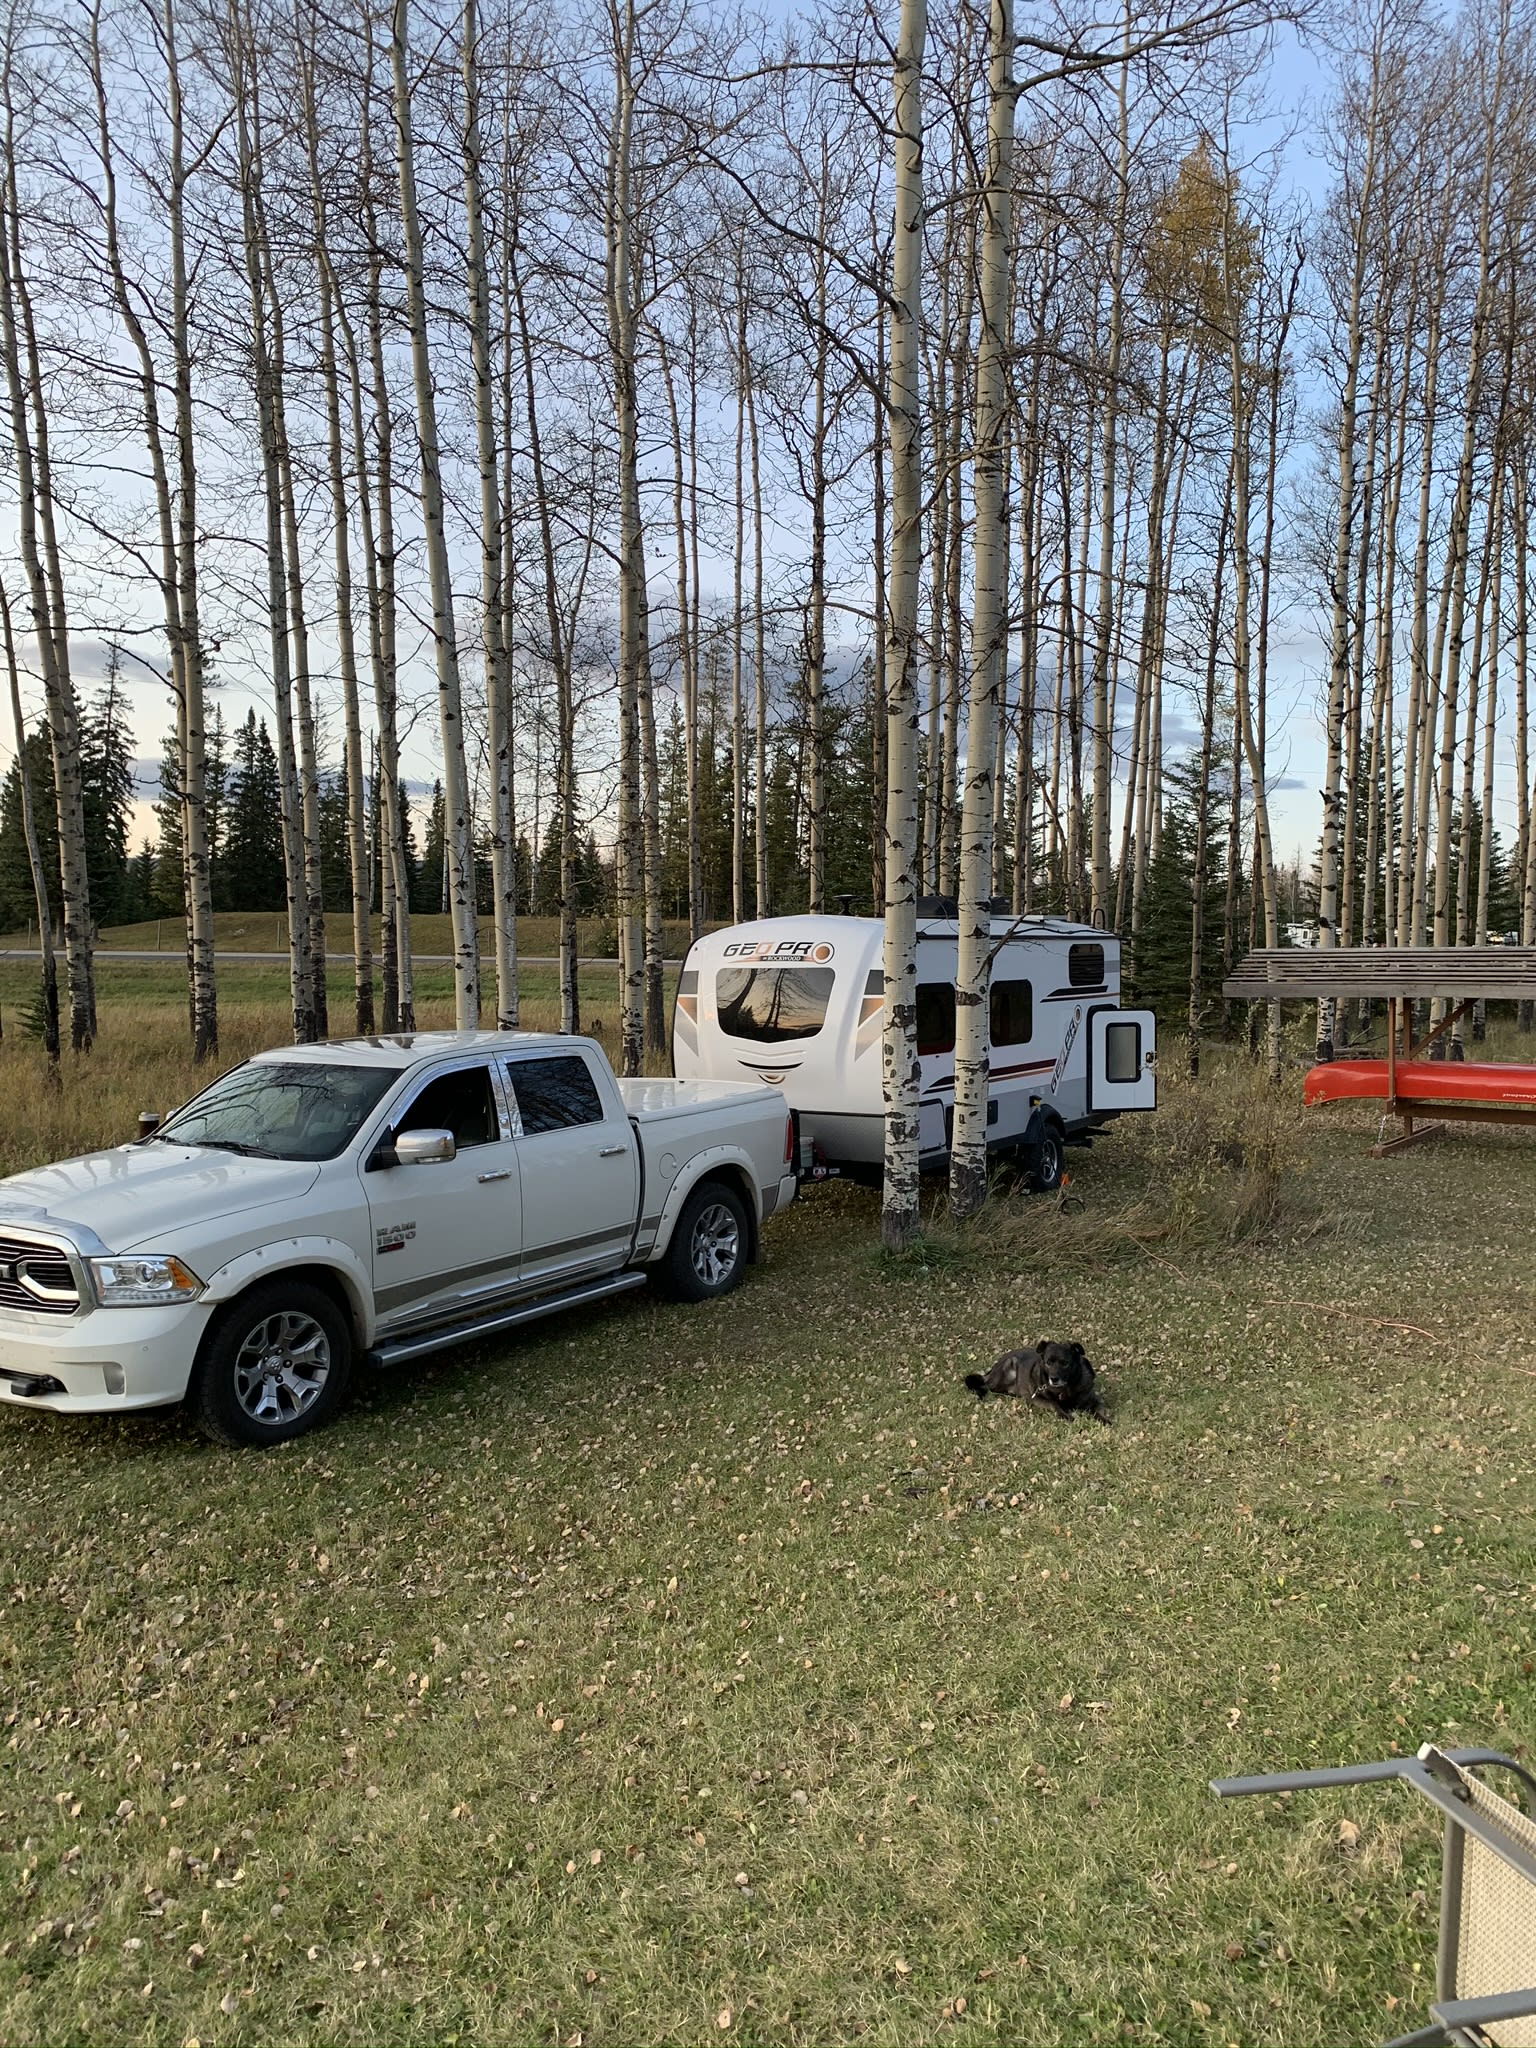 Athabasca RV Site